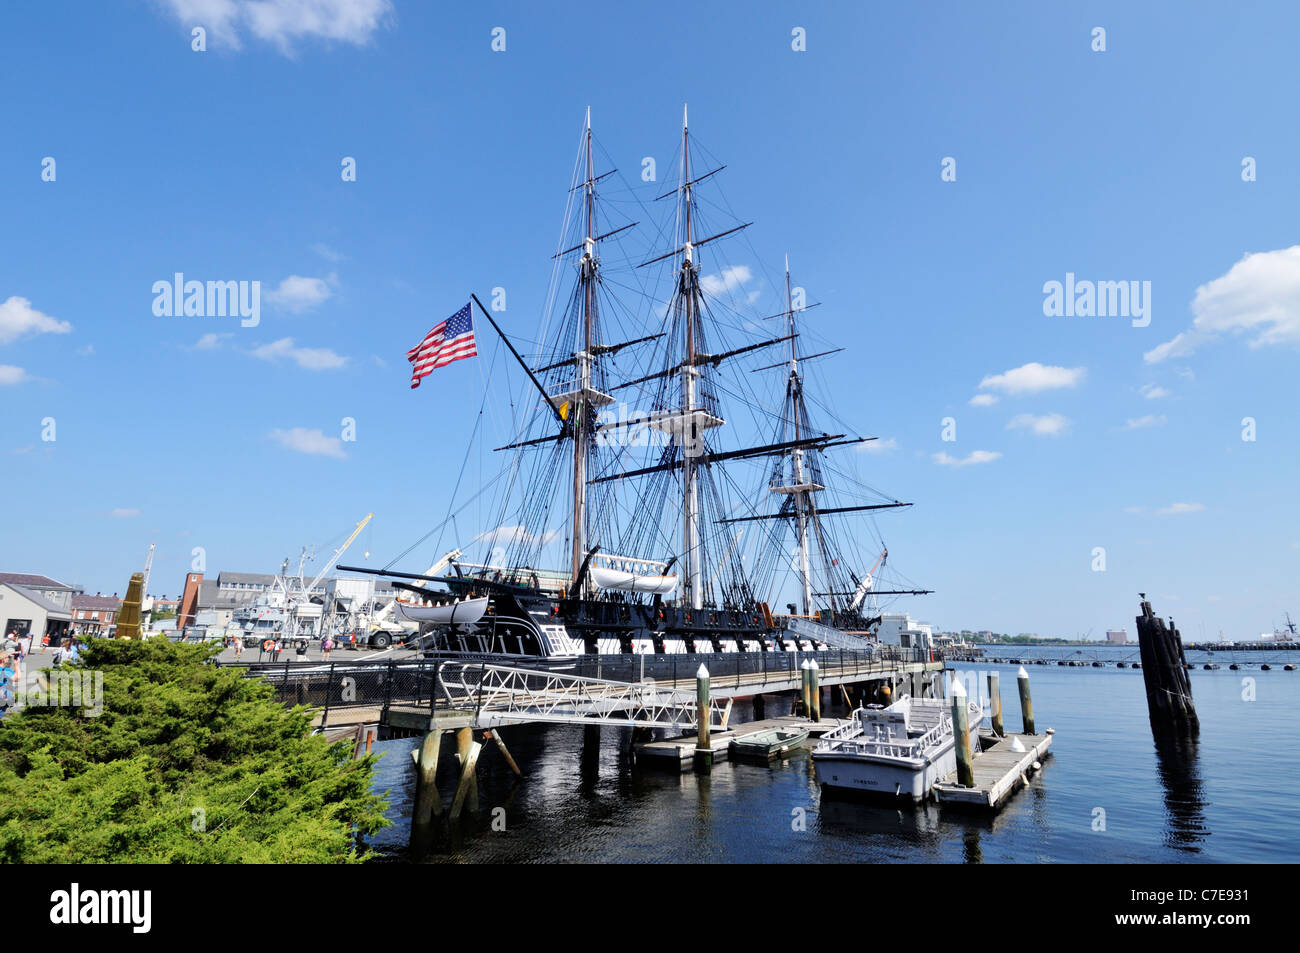 The USS Constitution, aka Old Ironsides the oldest commissioned US Naval ship docked at the Charlestown Navy Yard, Boston Massachusetts USA. Stock Photo